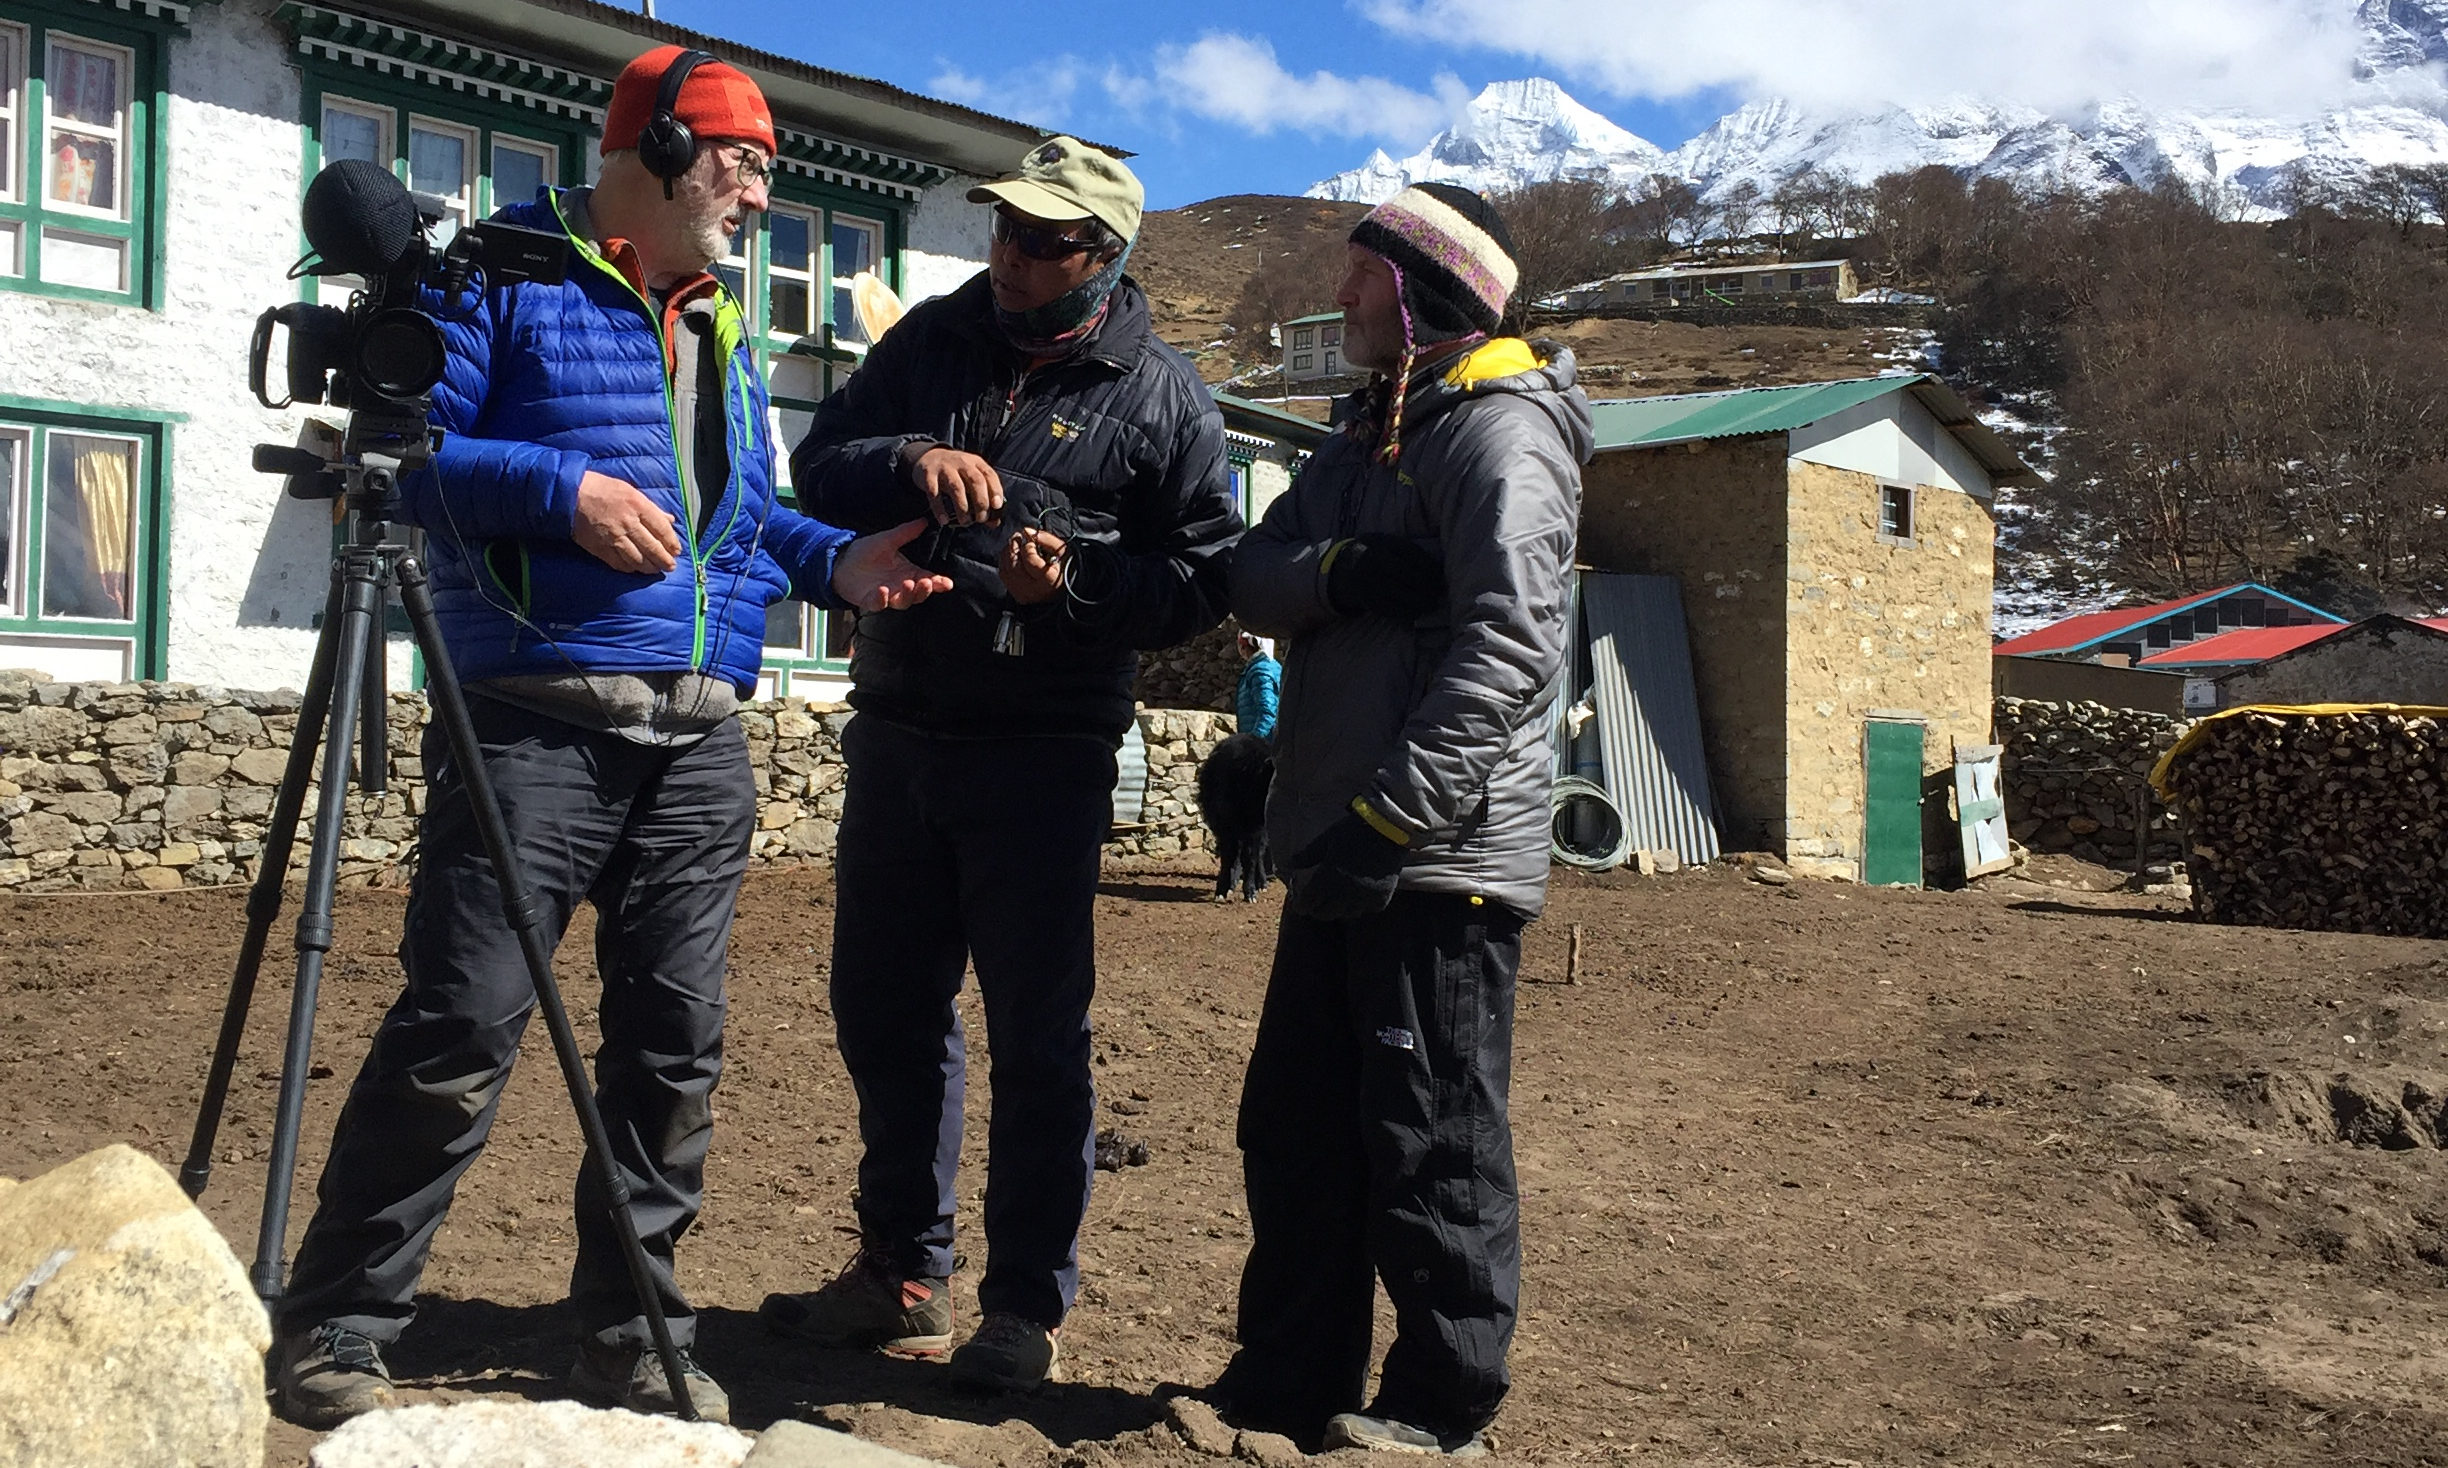 The team shooting the Sherpa film in Nepal